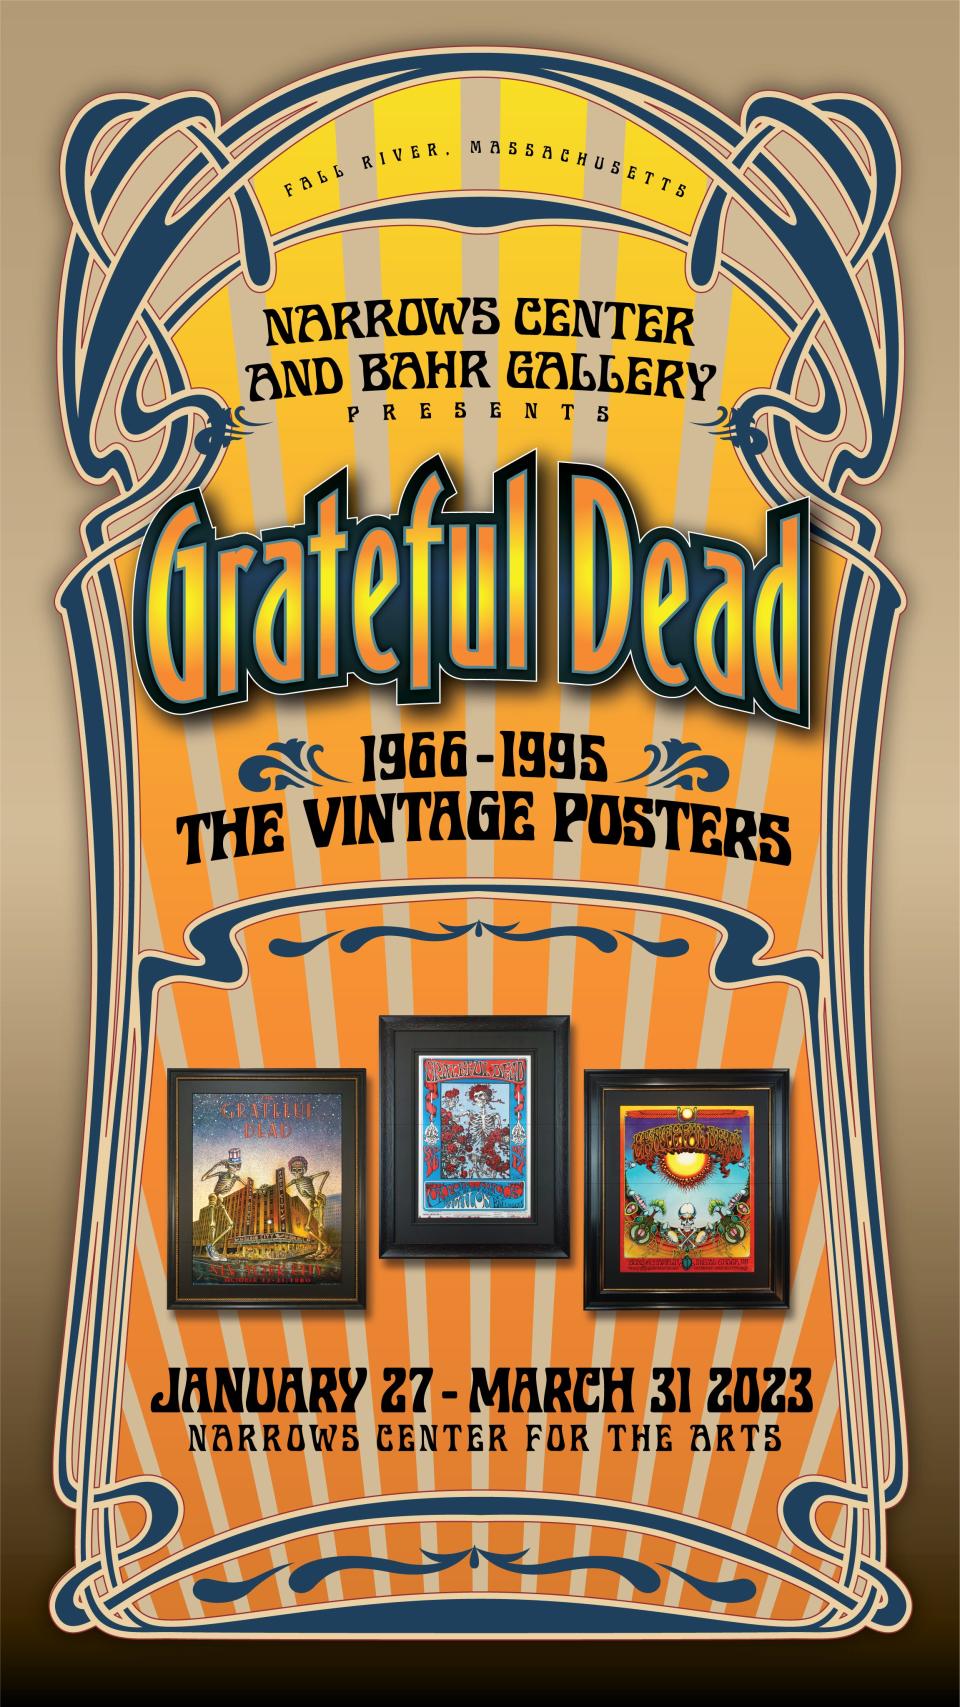 “Grateful Dead: The Vintage Posters, 1966-1995” co-curated by the Bahr Gallery, will be on exhibit at The Narrows Center for the Arts until March 31.